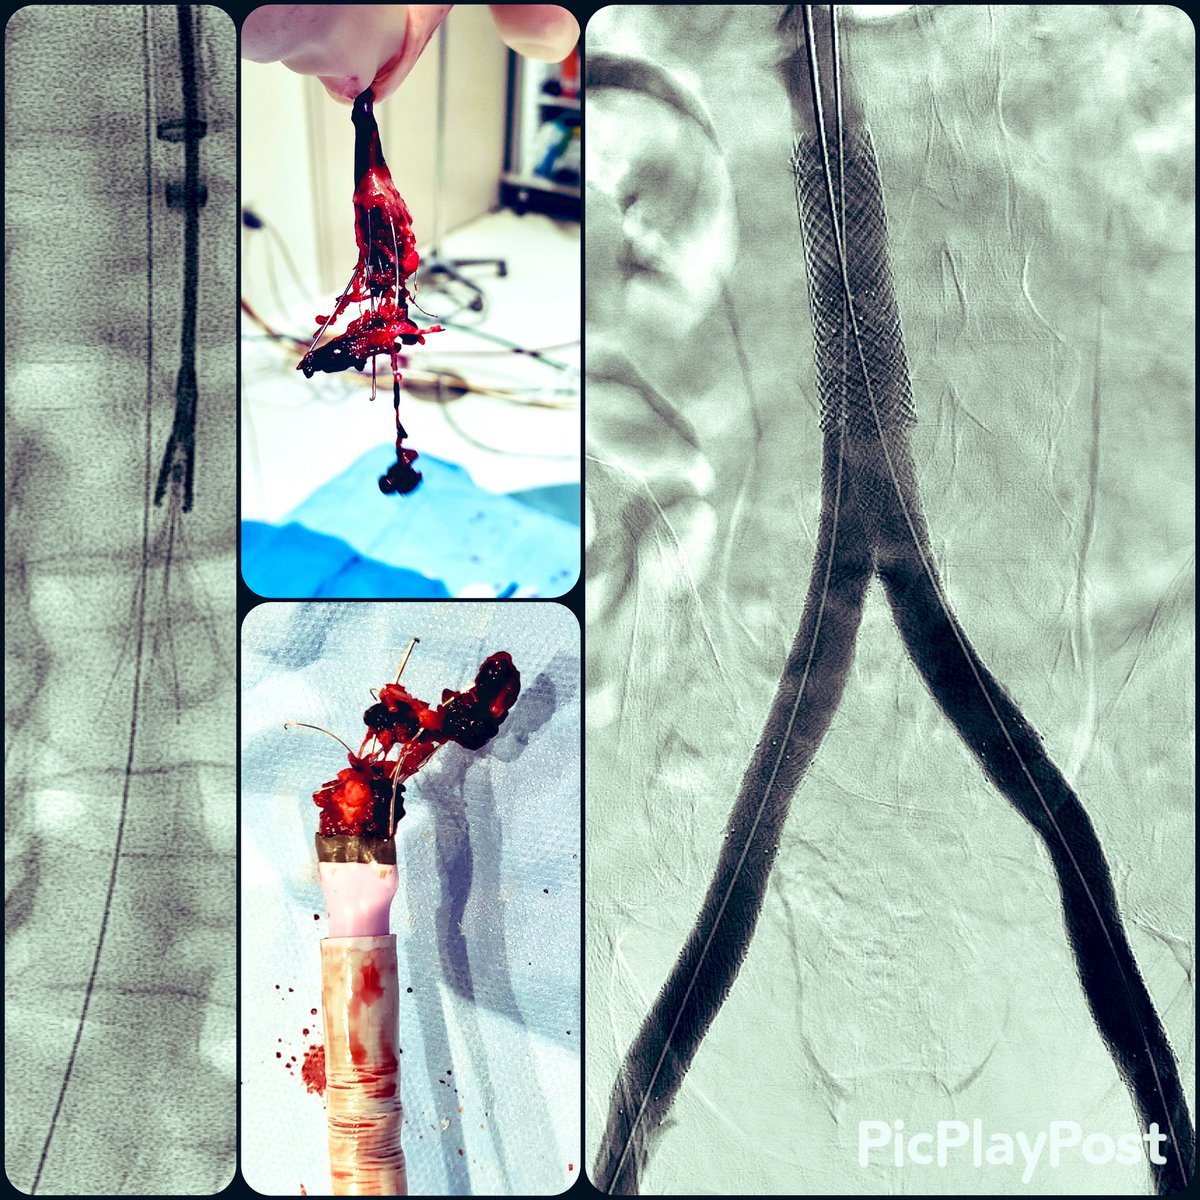 Gunther tulip filter placed 19yrs back now w/ complete iliocaval and b/l LE DVT. After @InariMedical Flowtriever & ClotTriever #SingleSessionThrombectomy, lots of elbow grease by @iRadRock & @vinitkhannamd, #filterOUT in 1 piece w/ beautiful double barrel recon. @SIR_ECS @SIRRFS